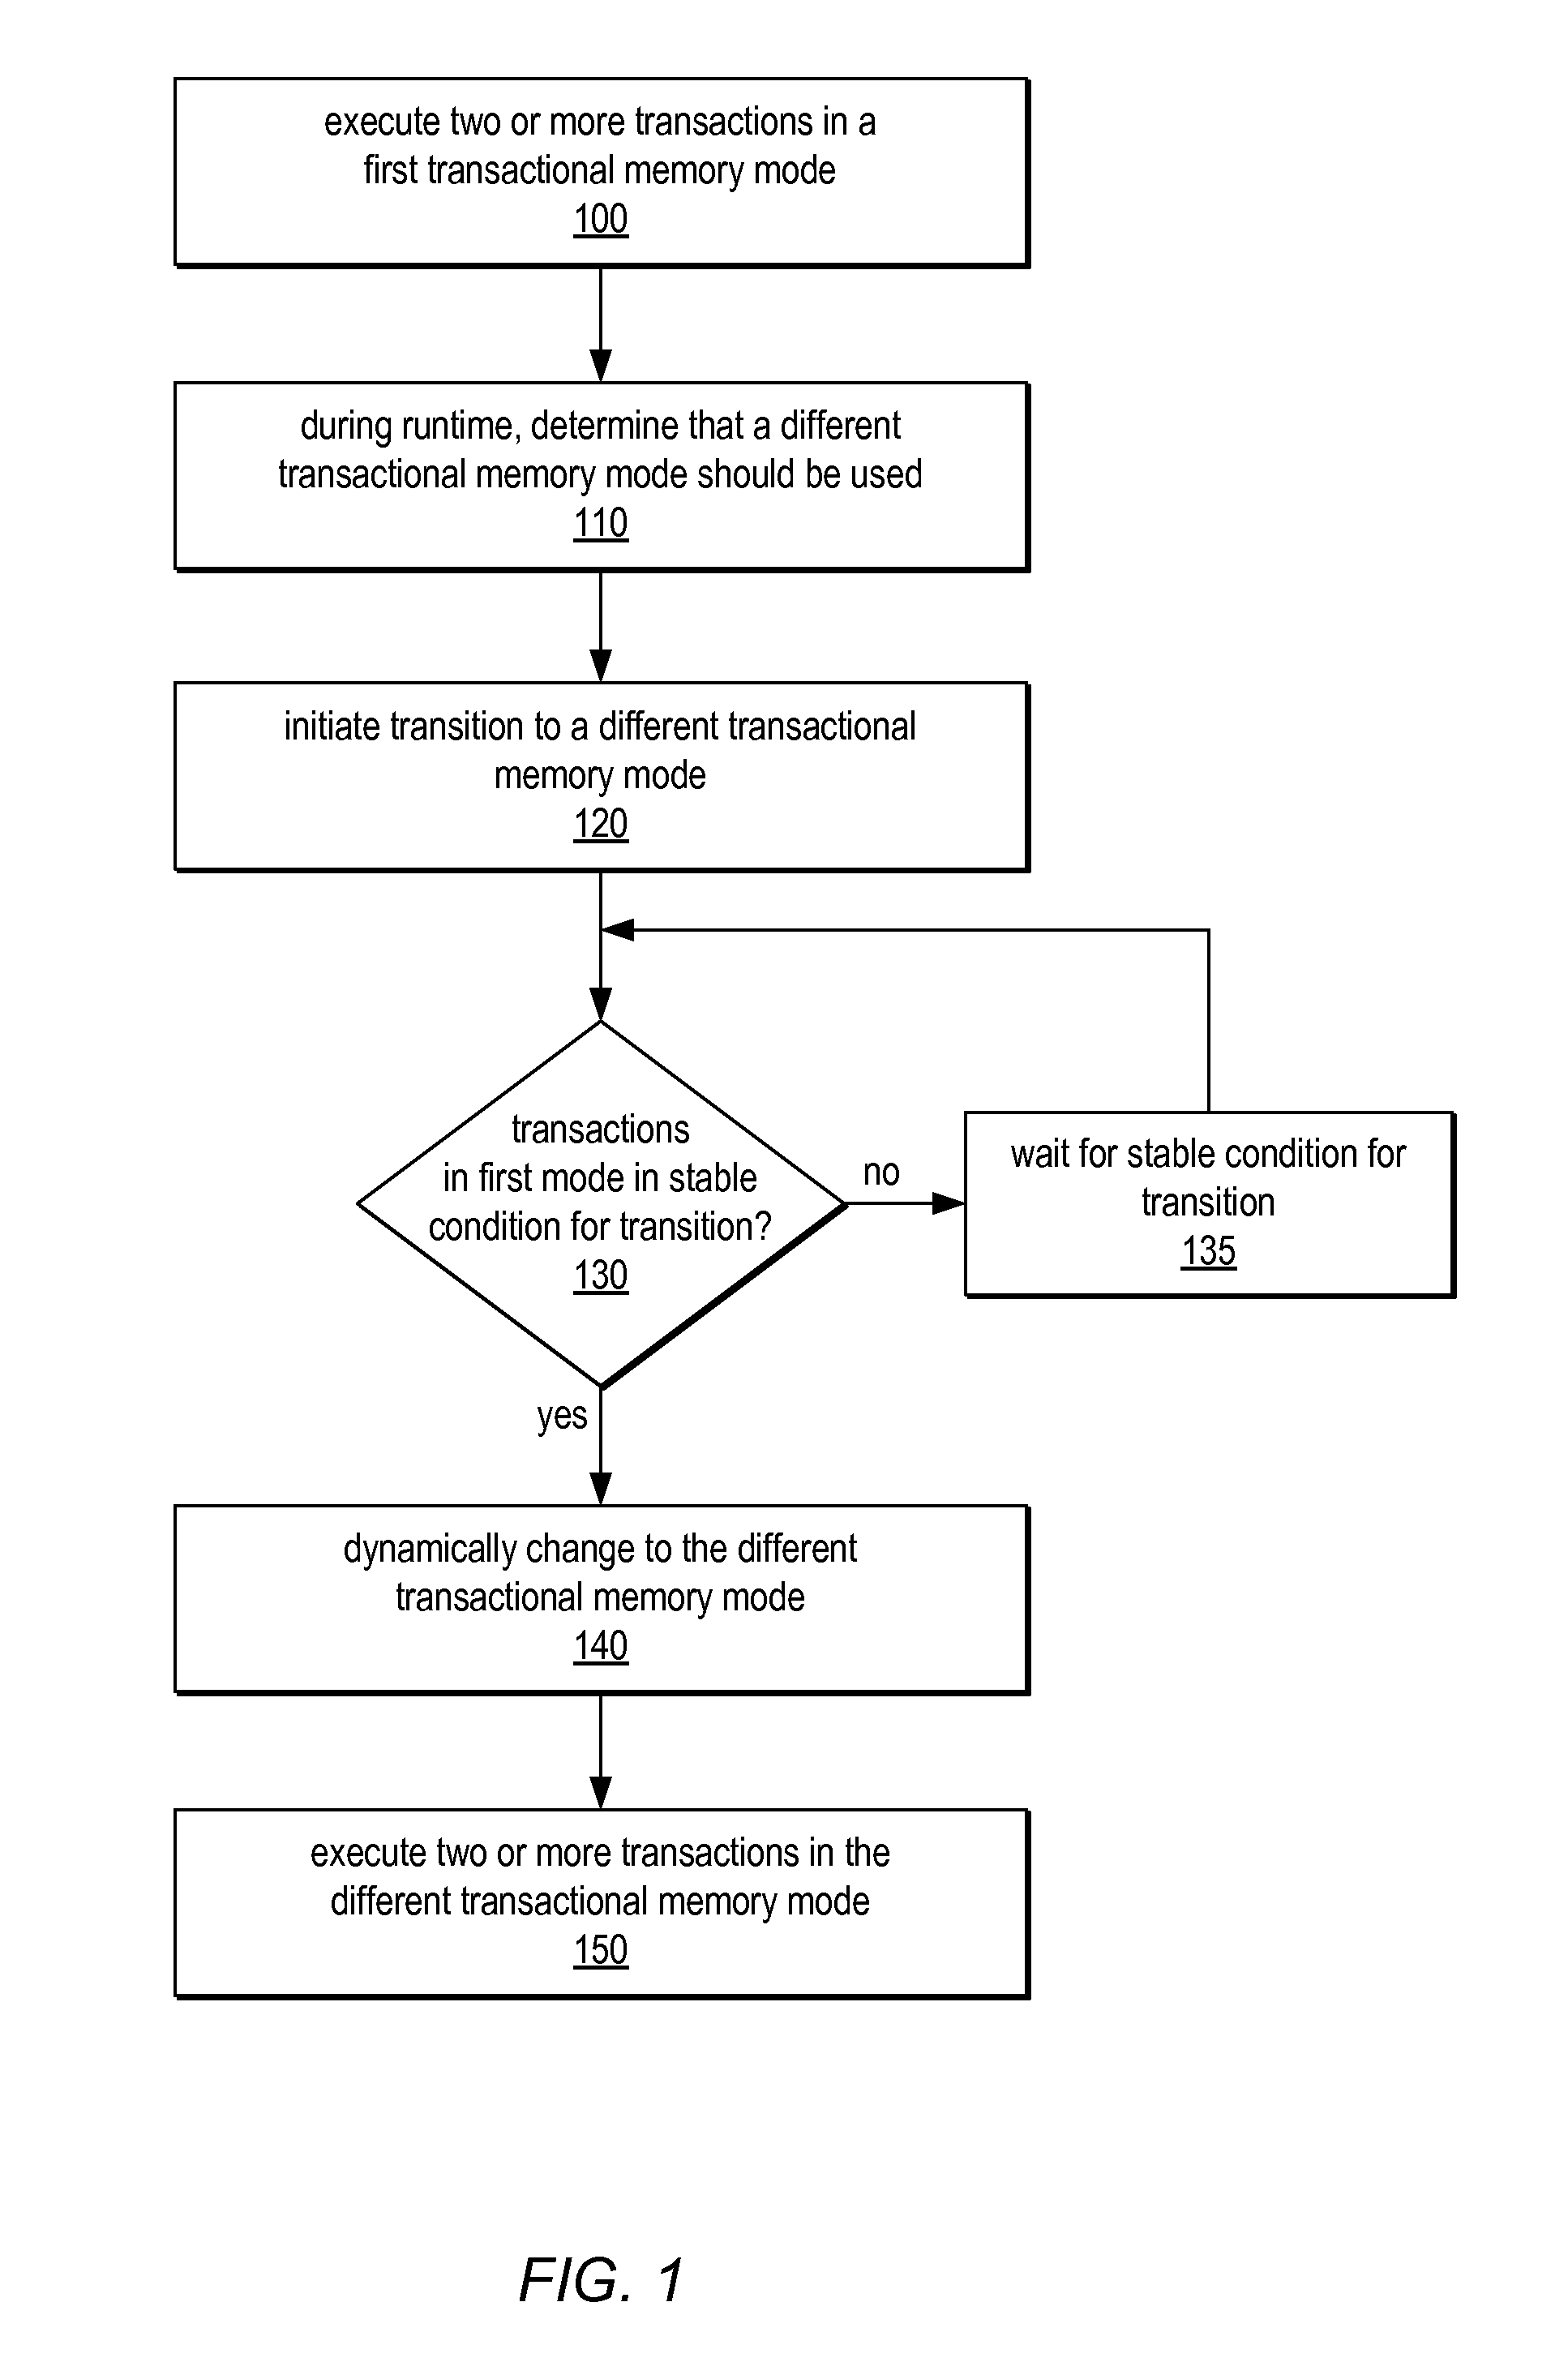 System and method for supporting phased transactional memory modes